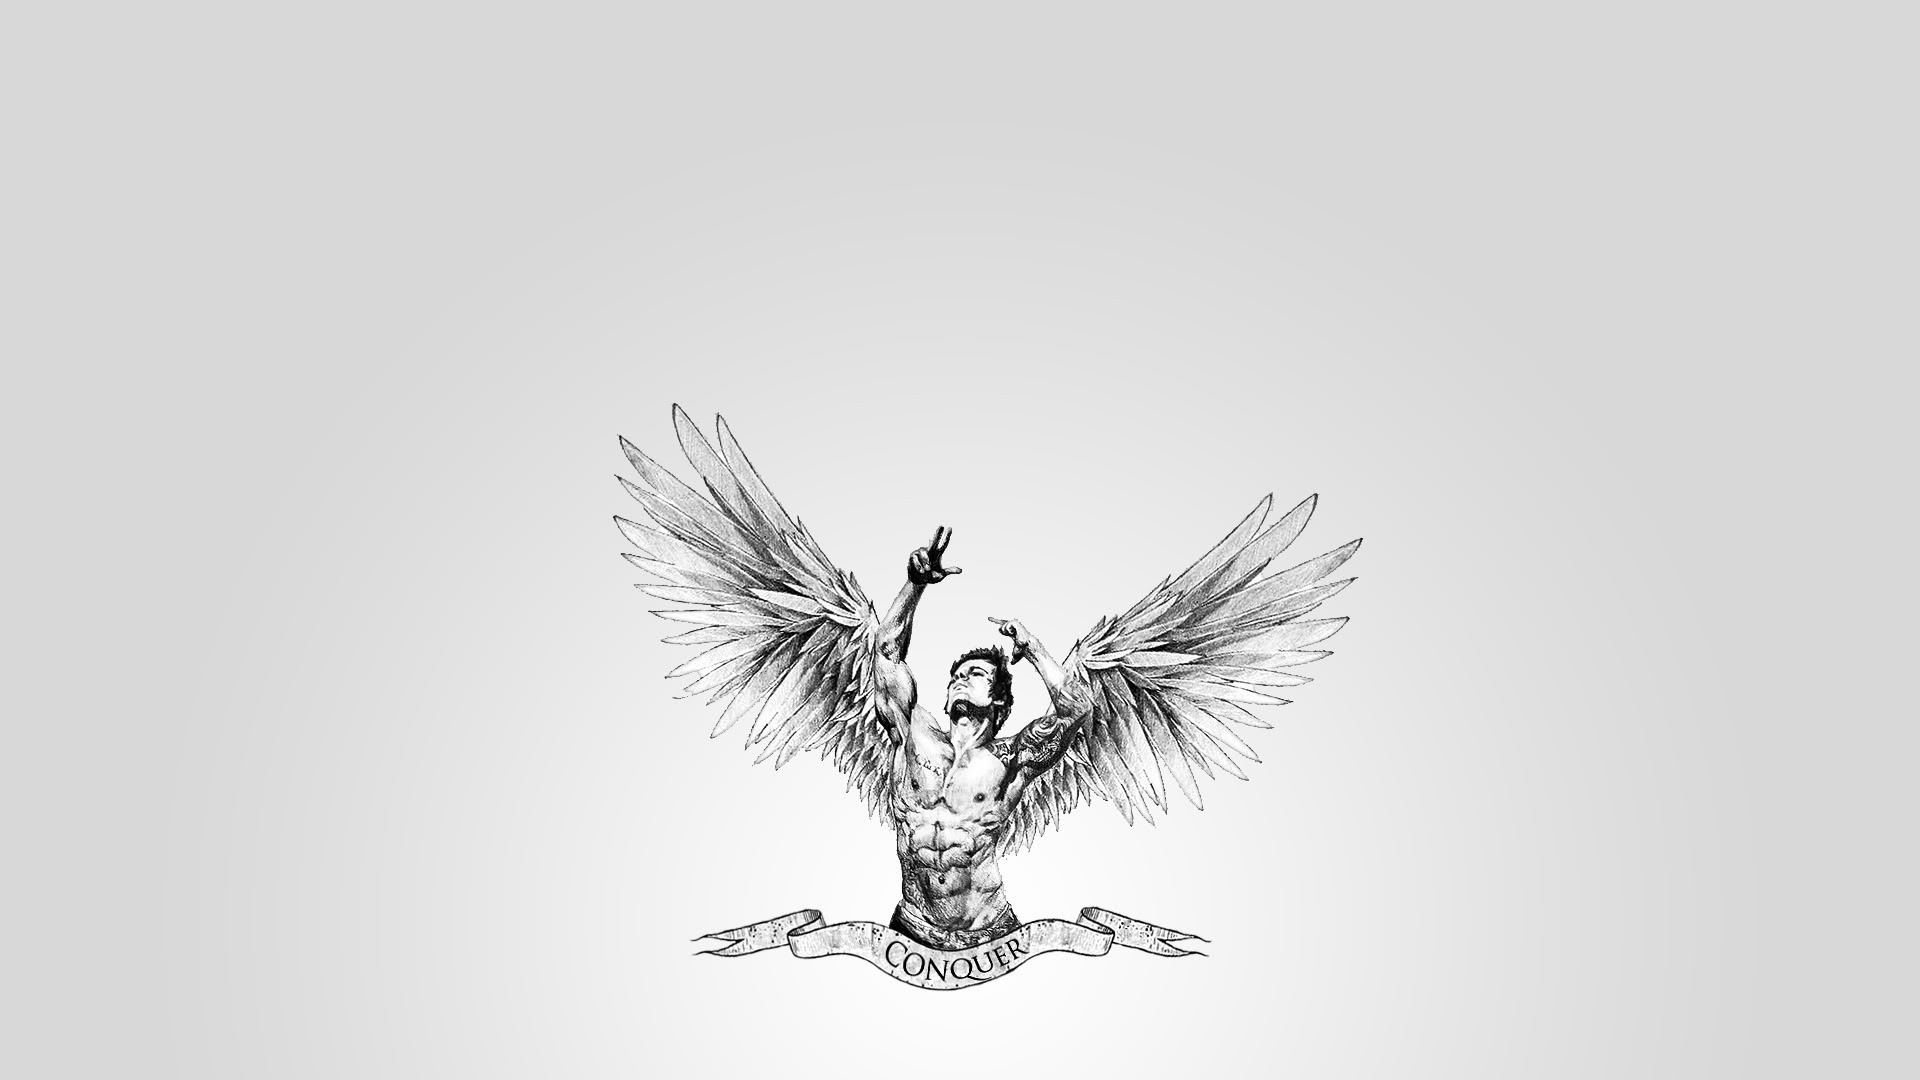 General 1920x1080 Zyzz men simple background wings monochrome minimalism drawing shirtless